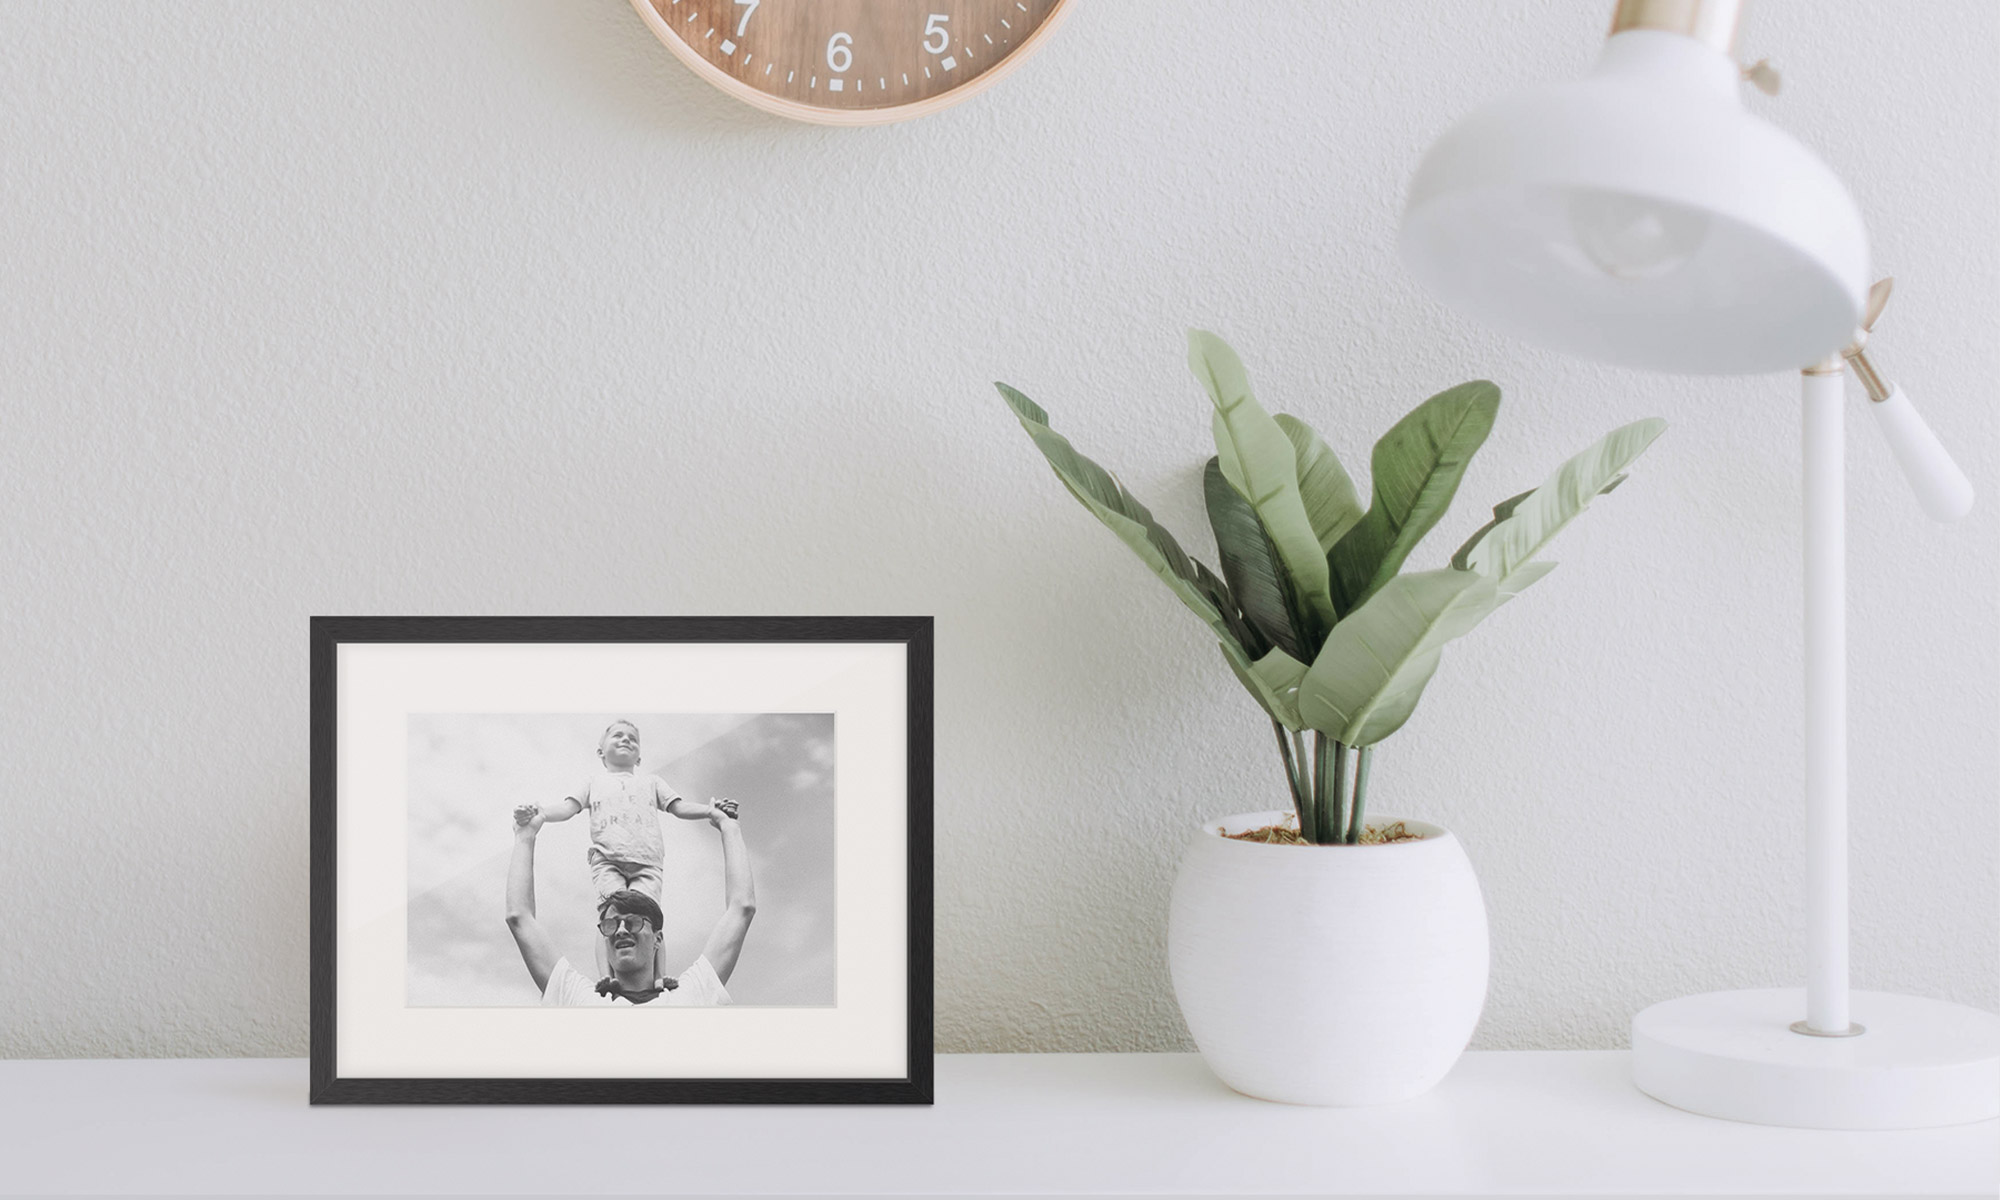 Framed image next to plant and lamp